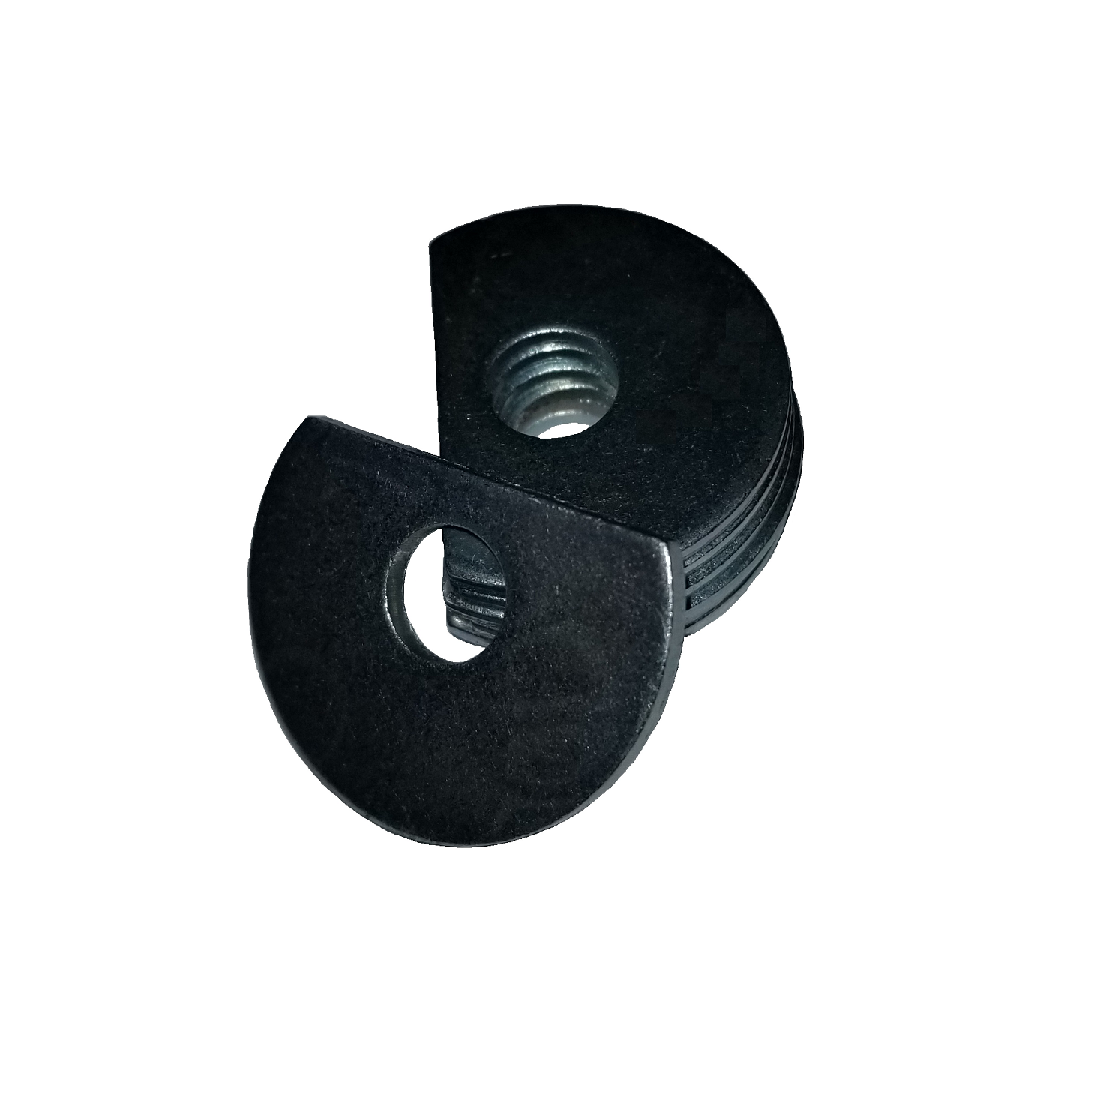 Clipped OD Washer - 0.531 ID, 1.250 OD, 0.125 Thick, Spring Steel - Hard